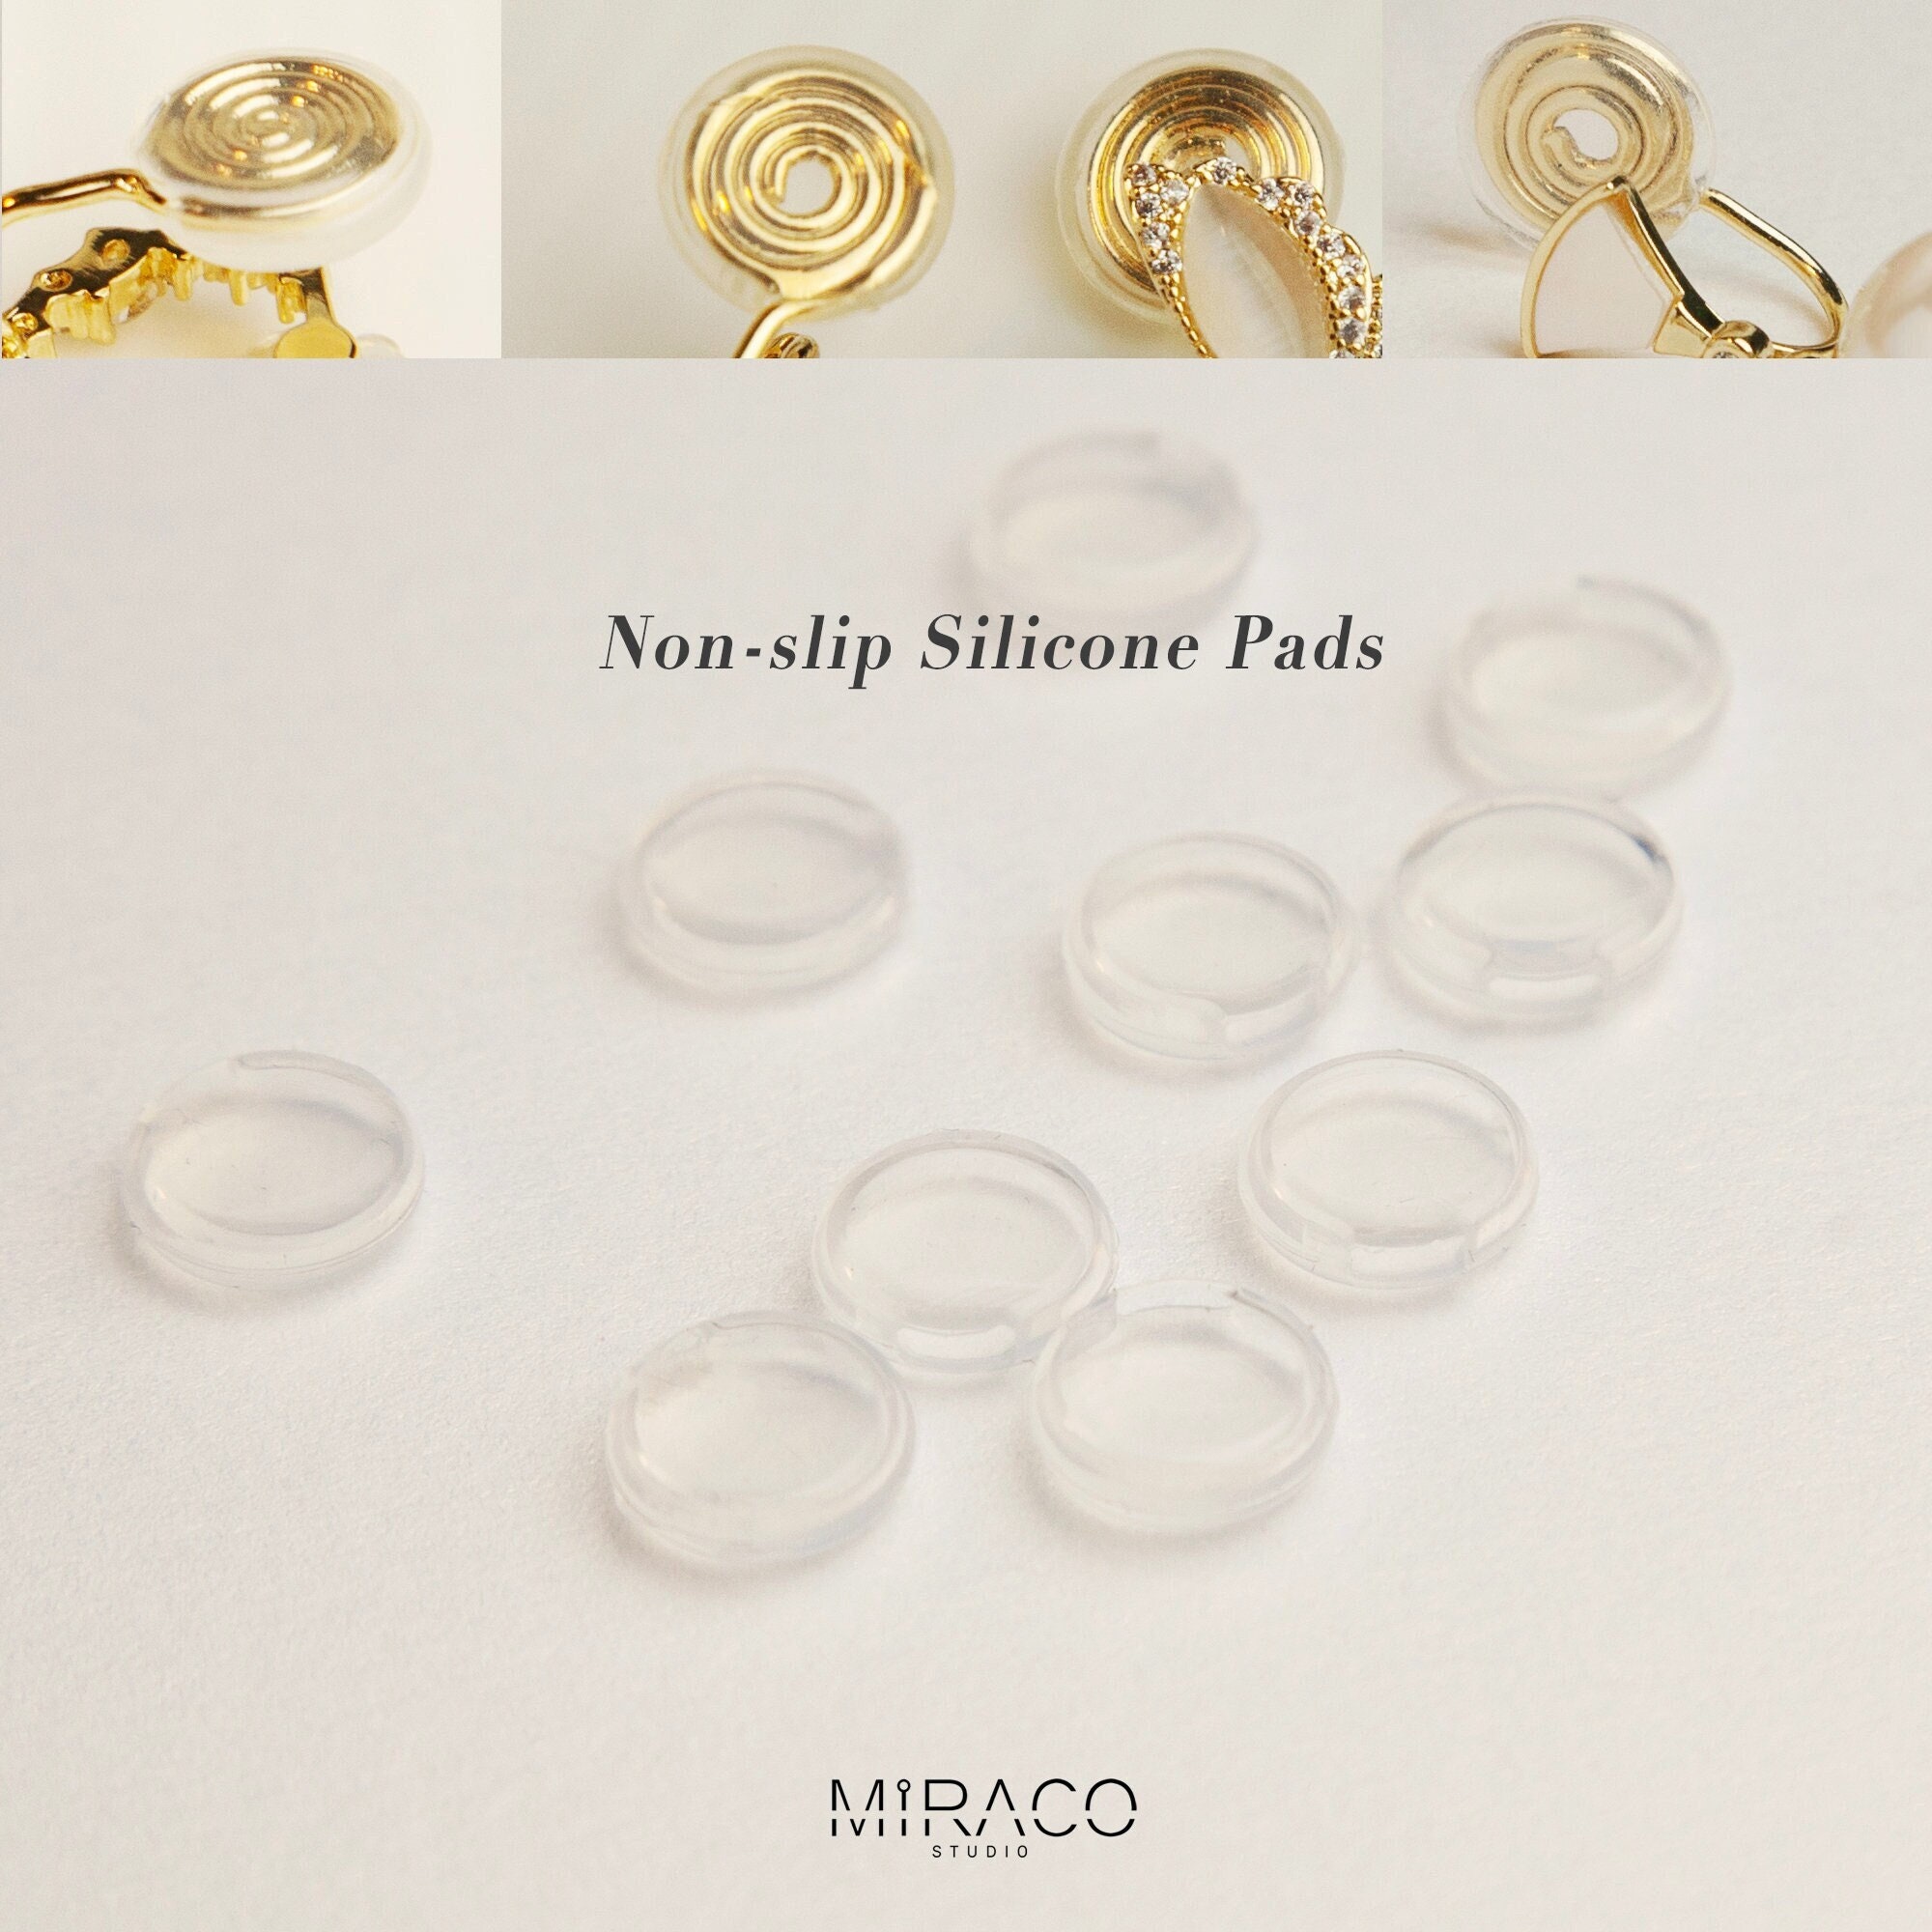 8k Gold Silicone Earring Back Pads For Stud/drop Earrings, Locking